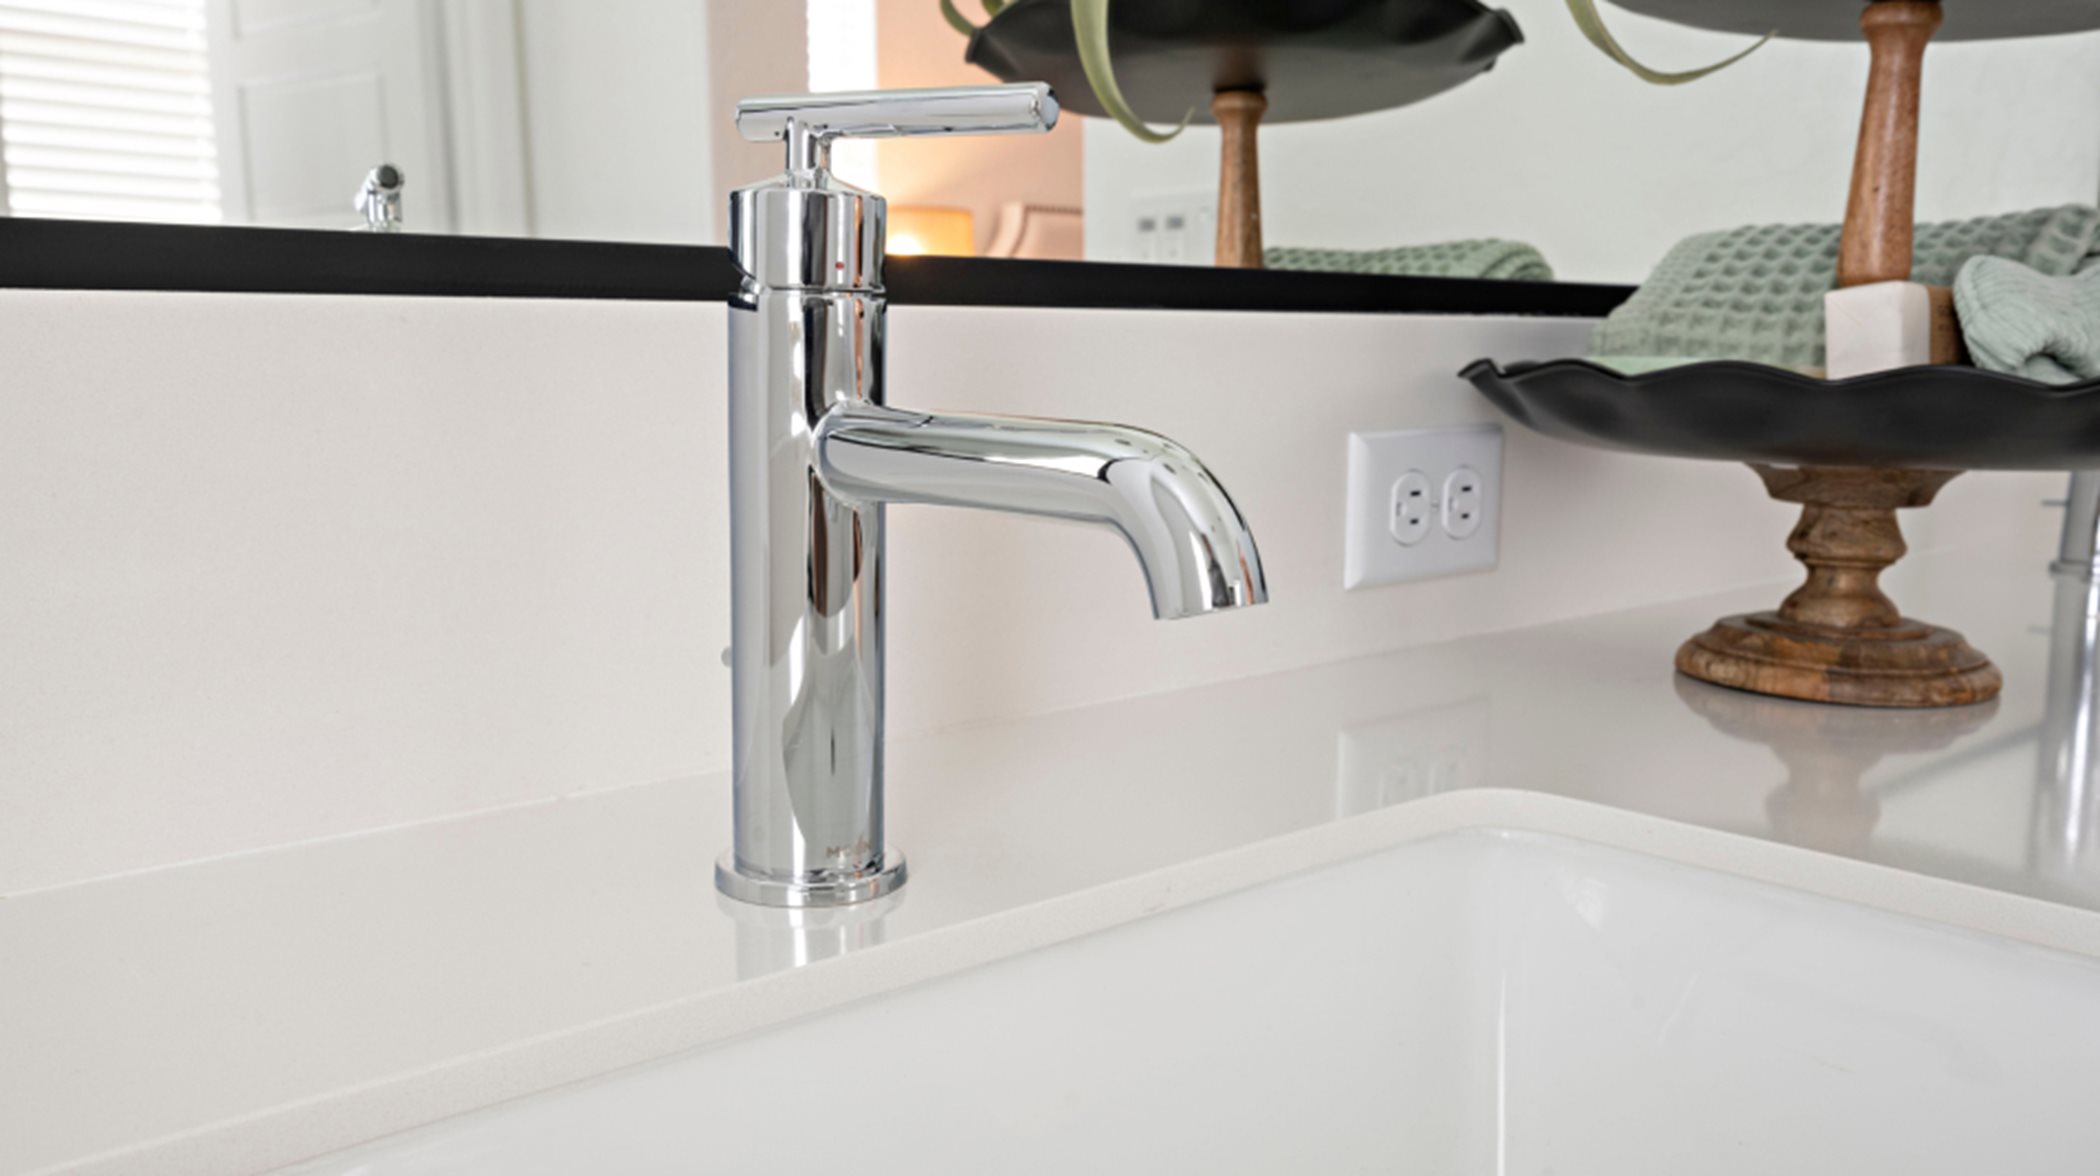 Moen® fixtures and faucets with chrome finish